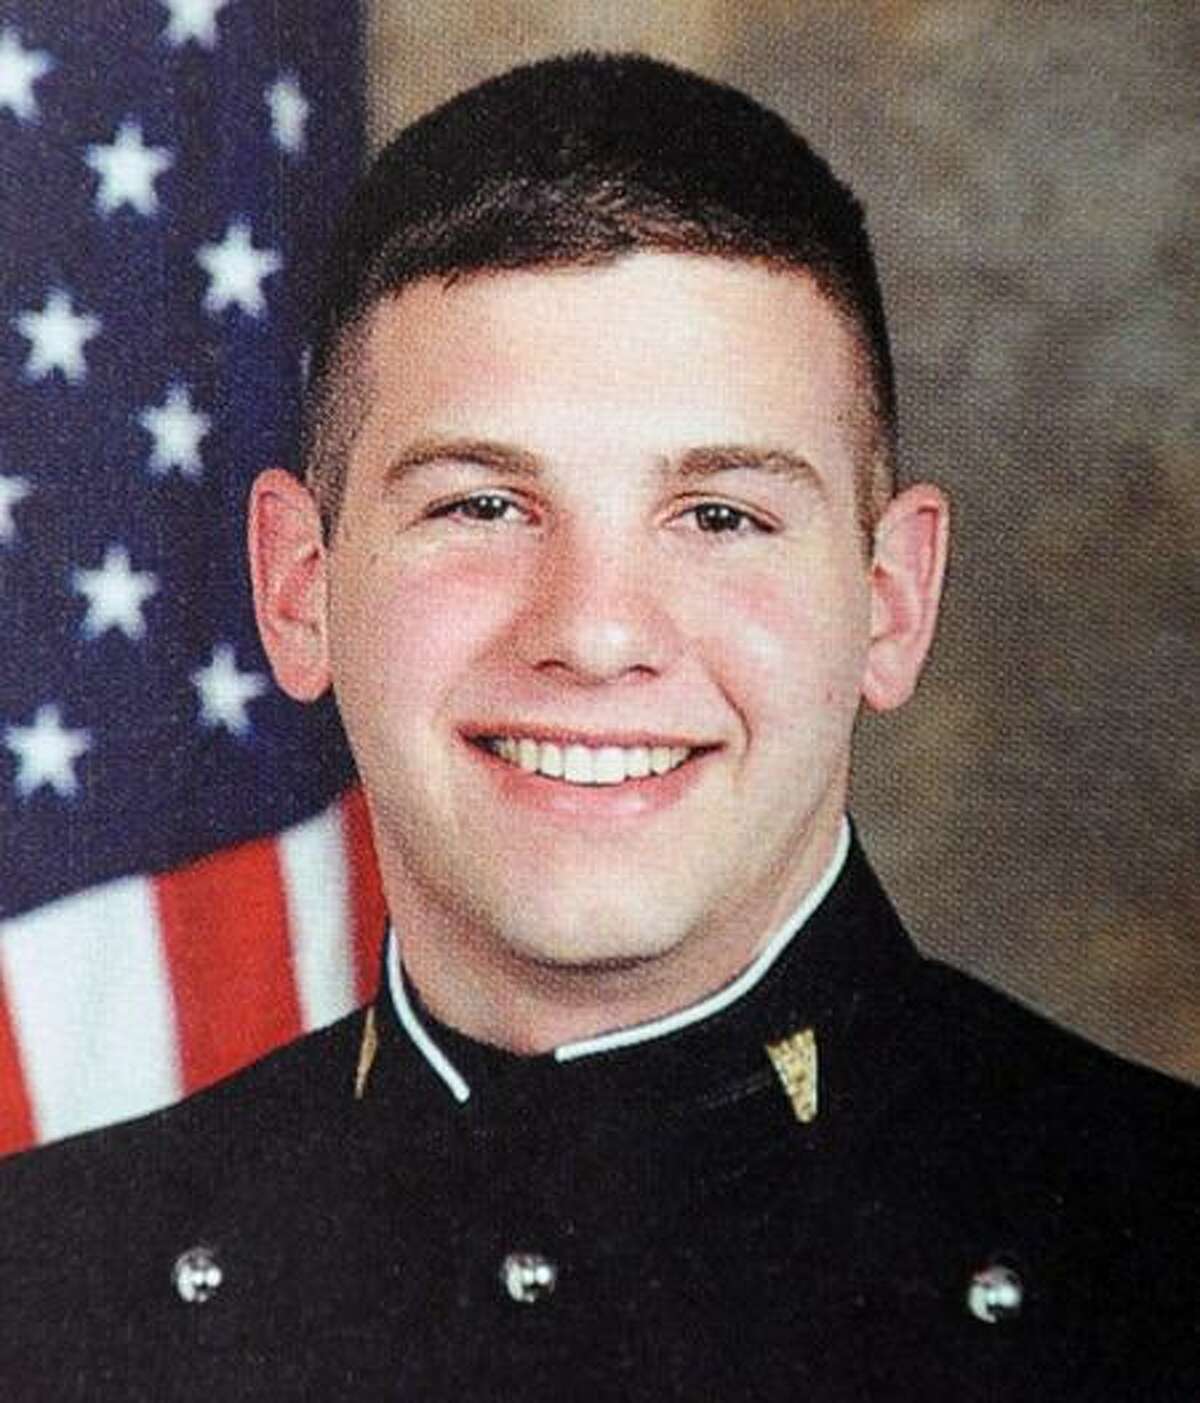 This 2001 photo released by Norwich University Aug. 8shows alumnus Brian Bill of Stamford, who was among the SEALs killed in a weekend helicopter crash in Afghanistan. (Associated Press)